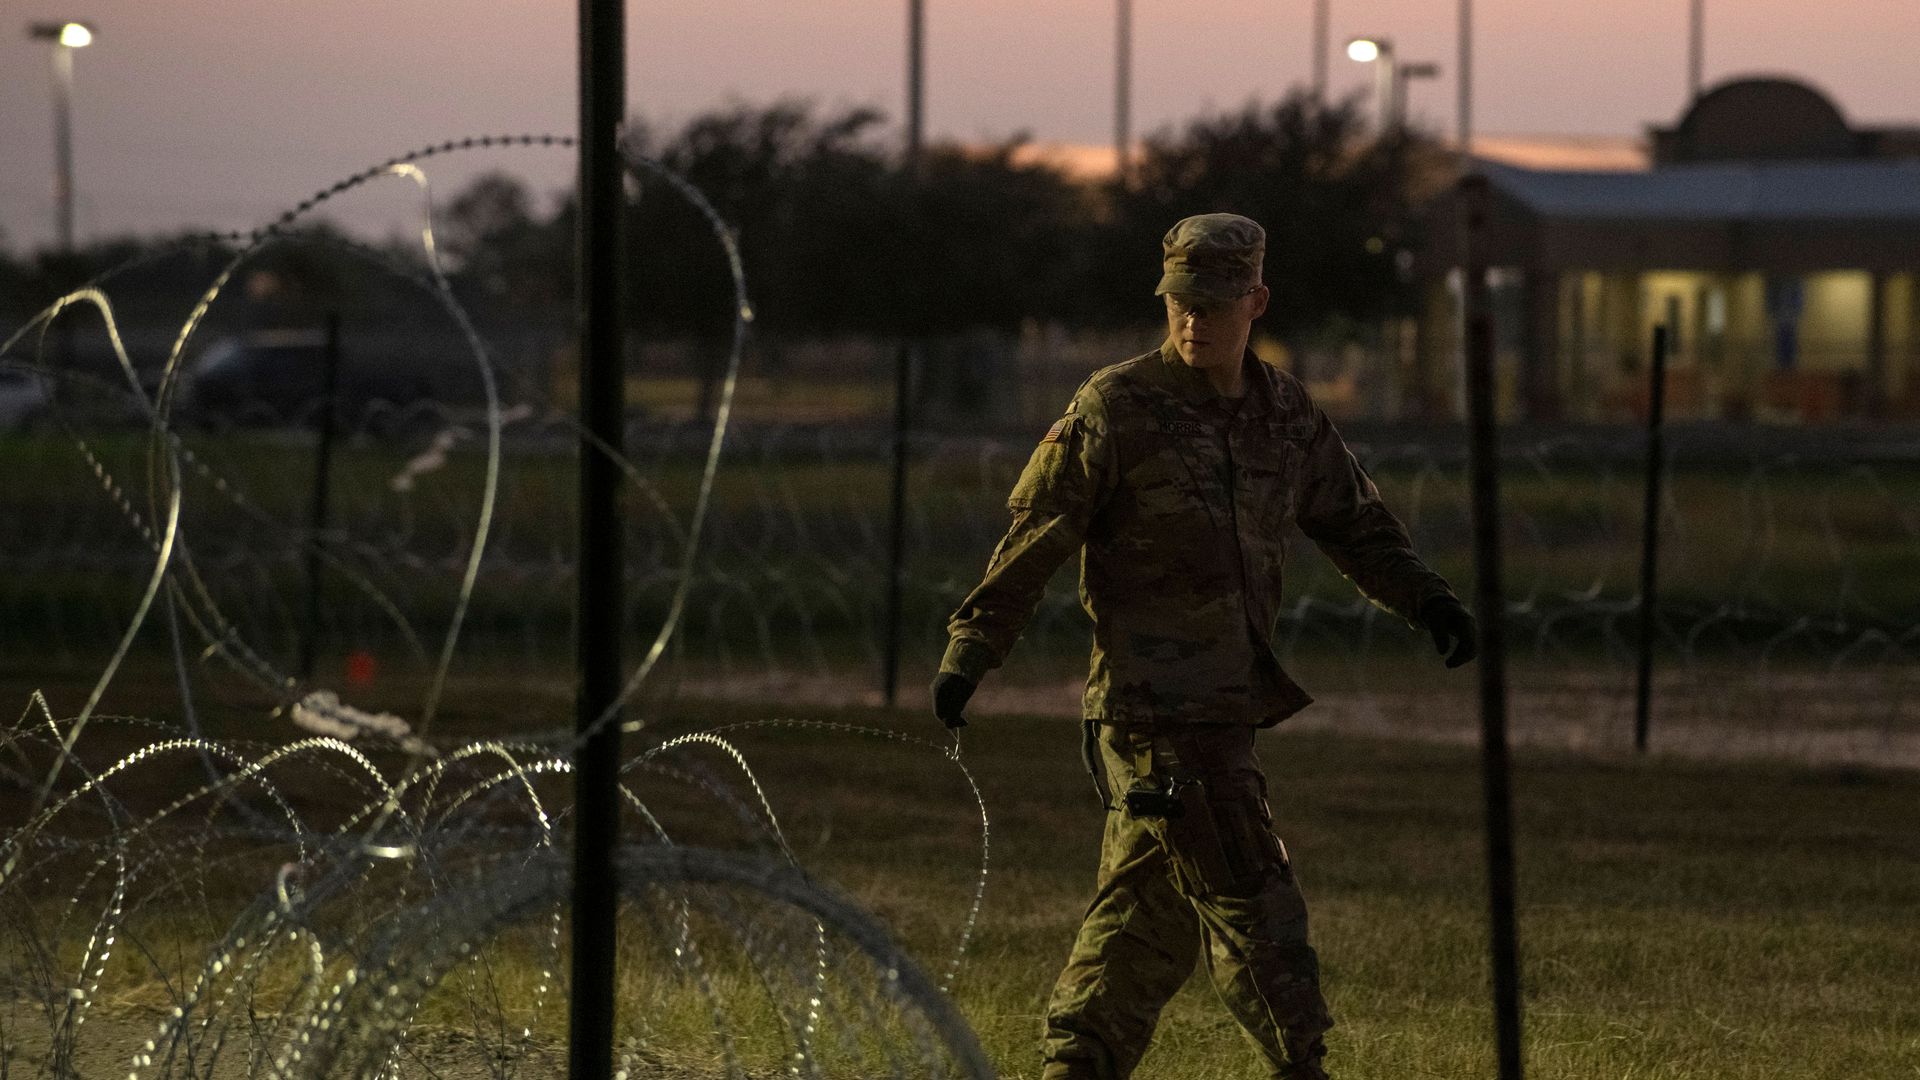 U.S. soldier at the border